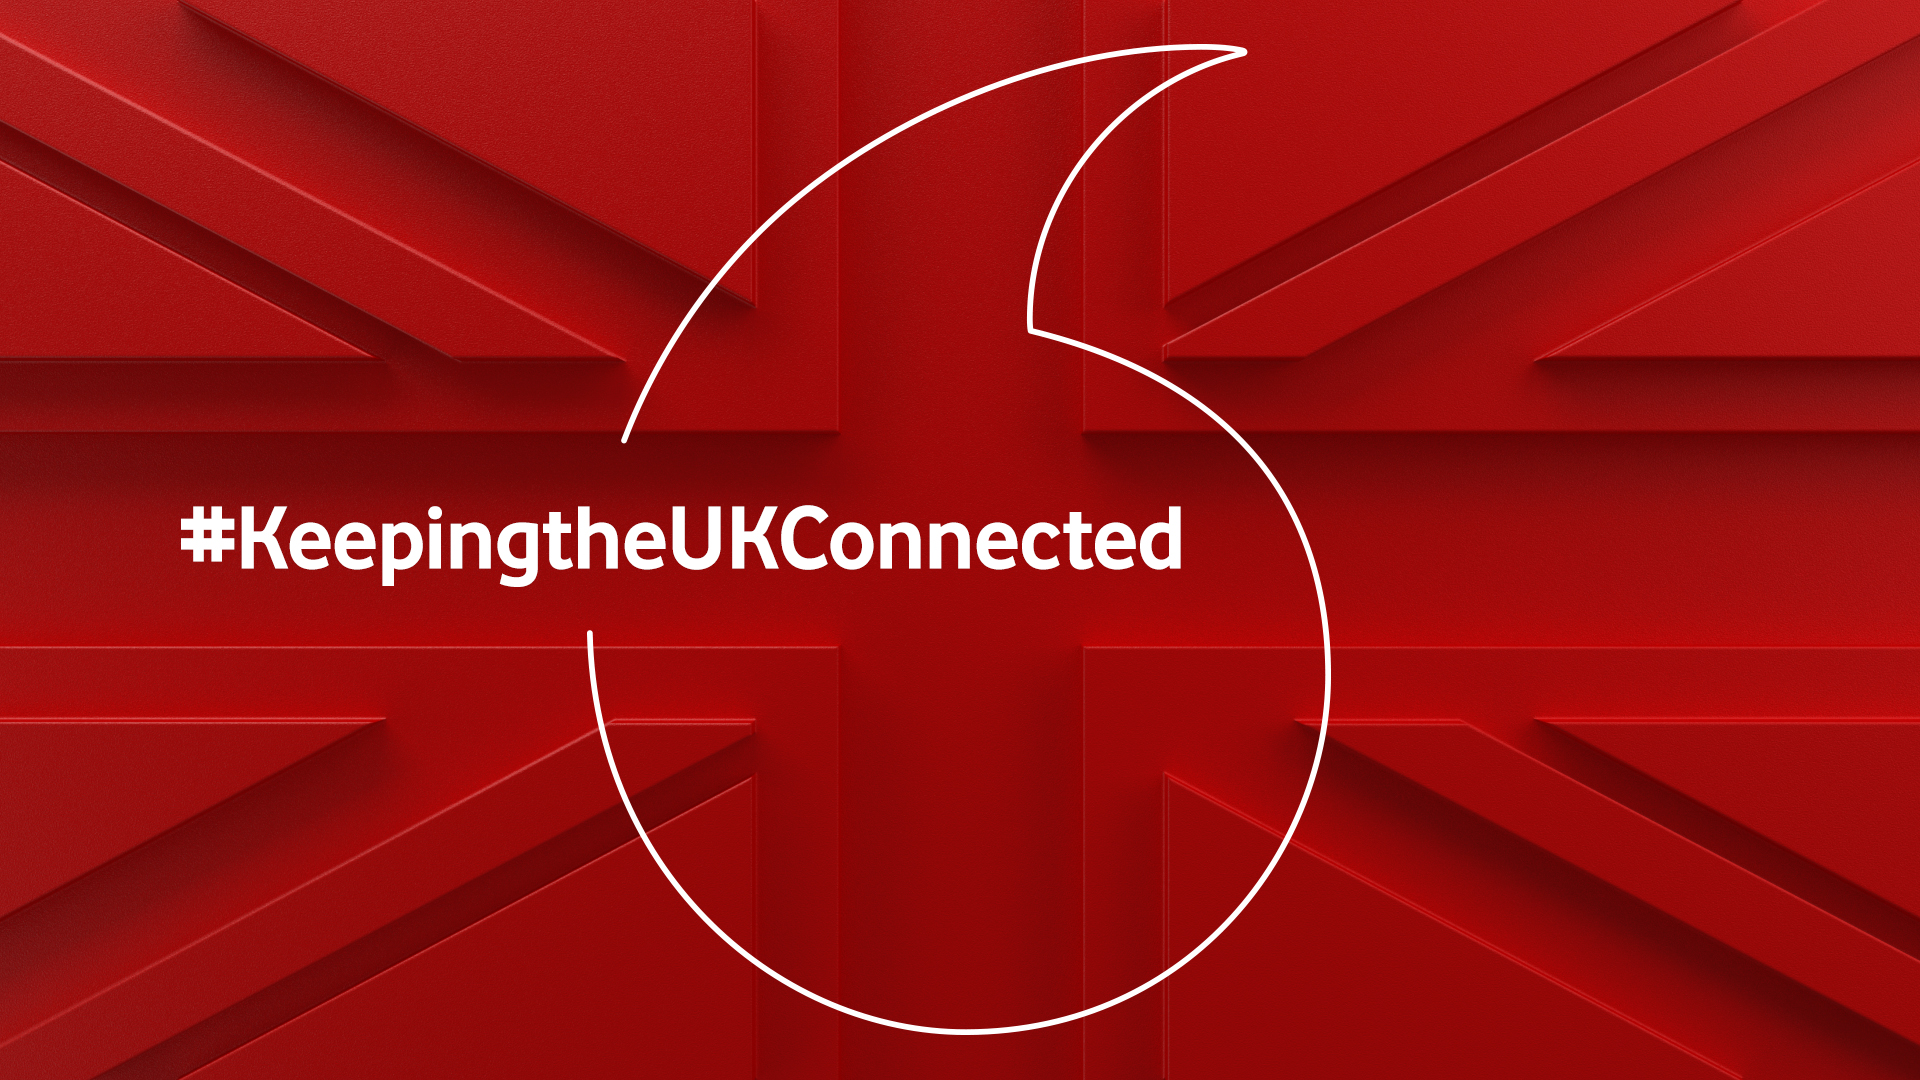 Keeping the UK Connected - hashtag